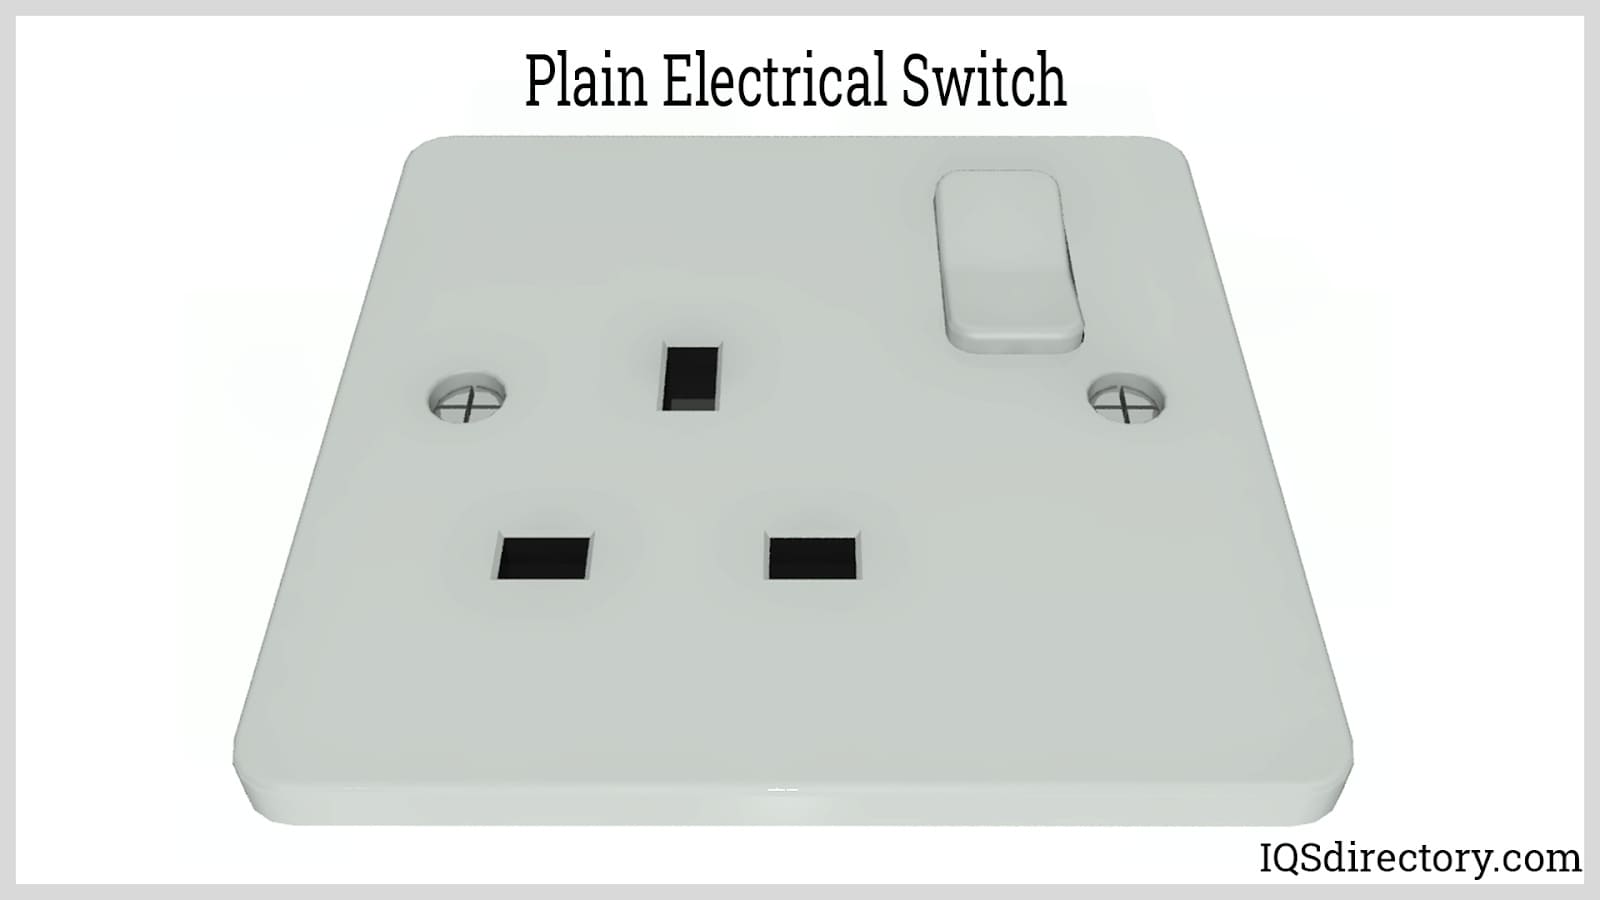 Plain Electrical Switch